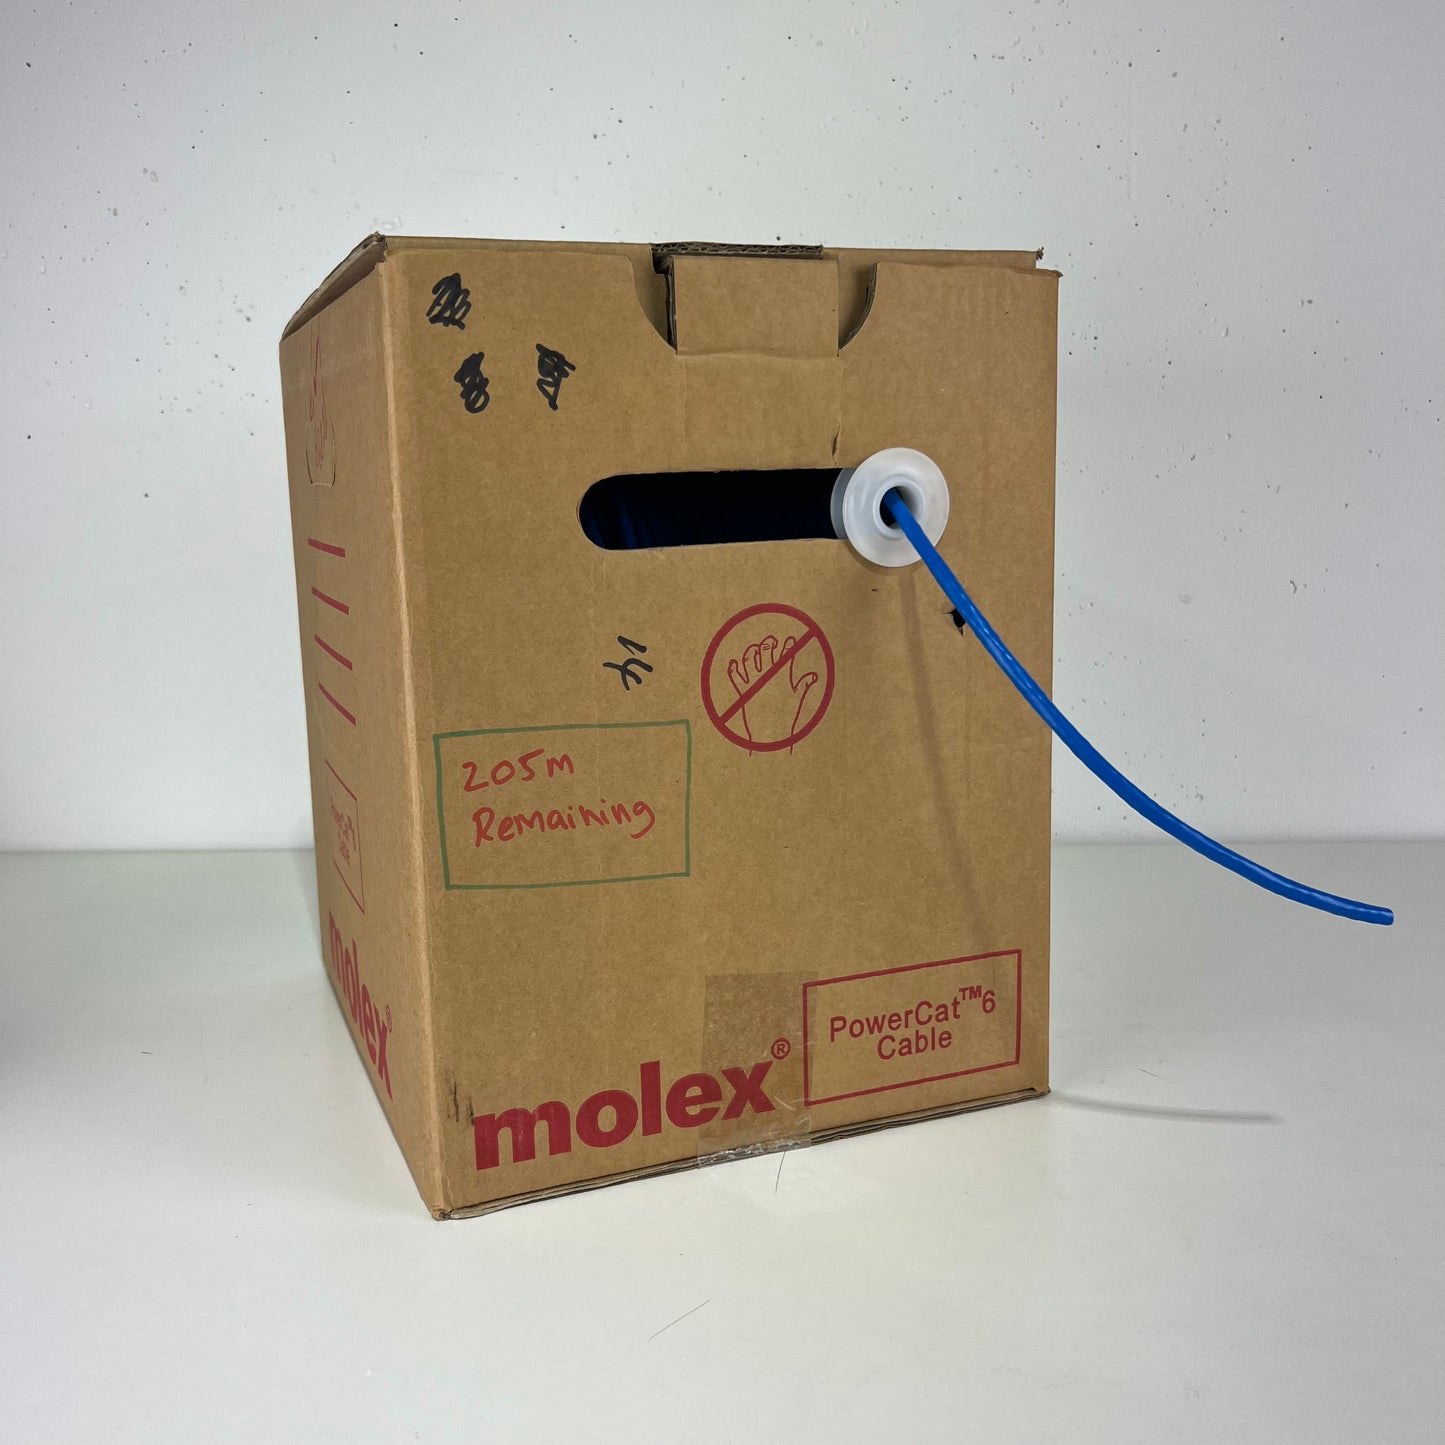 Molex Networking Cable Cat 6 Unterminated on Reel 205m